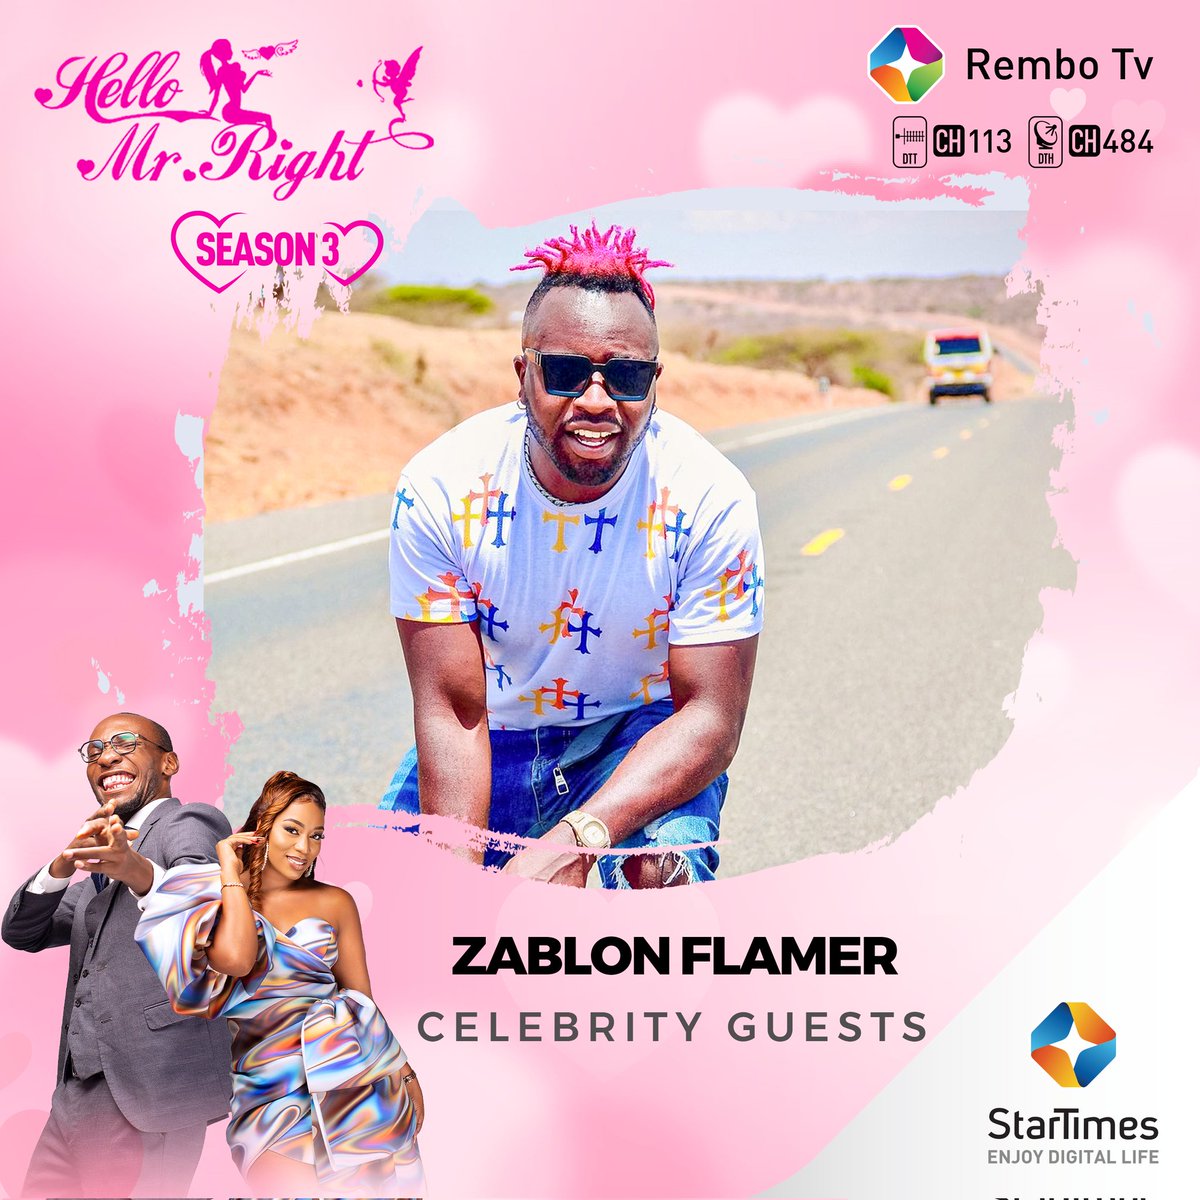 Rembo TV presents 'Hello Mr Right,' the hottest love reality show in Kenya, featuring the dynamic hosting duo, Dr Ofweneke and Diana Bahati. Grab your friends and watch it together!

#HelloMrRight3KE
#StarTimesAt35
Recharge Buy & Win